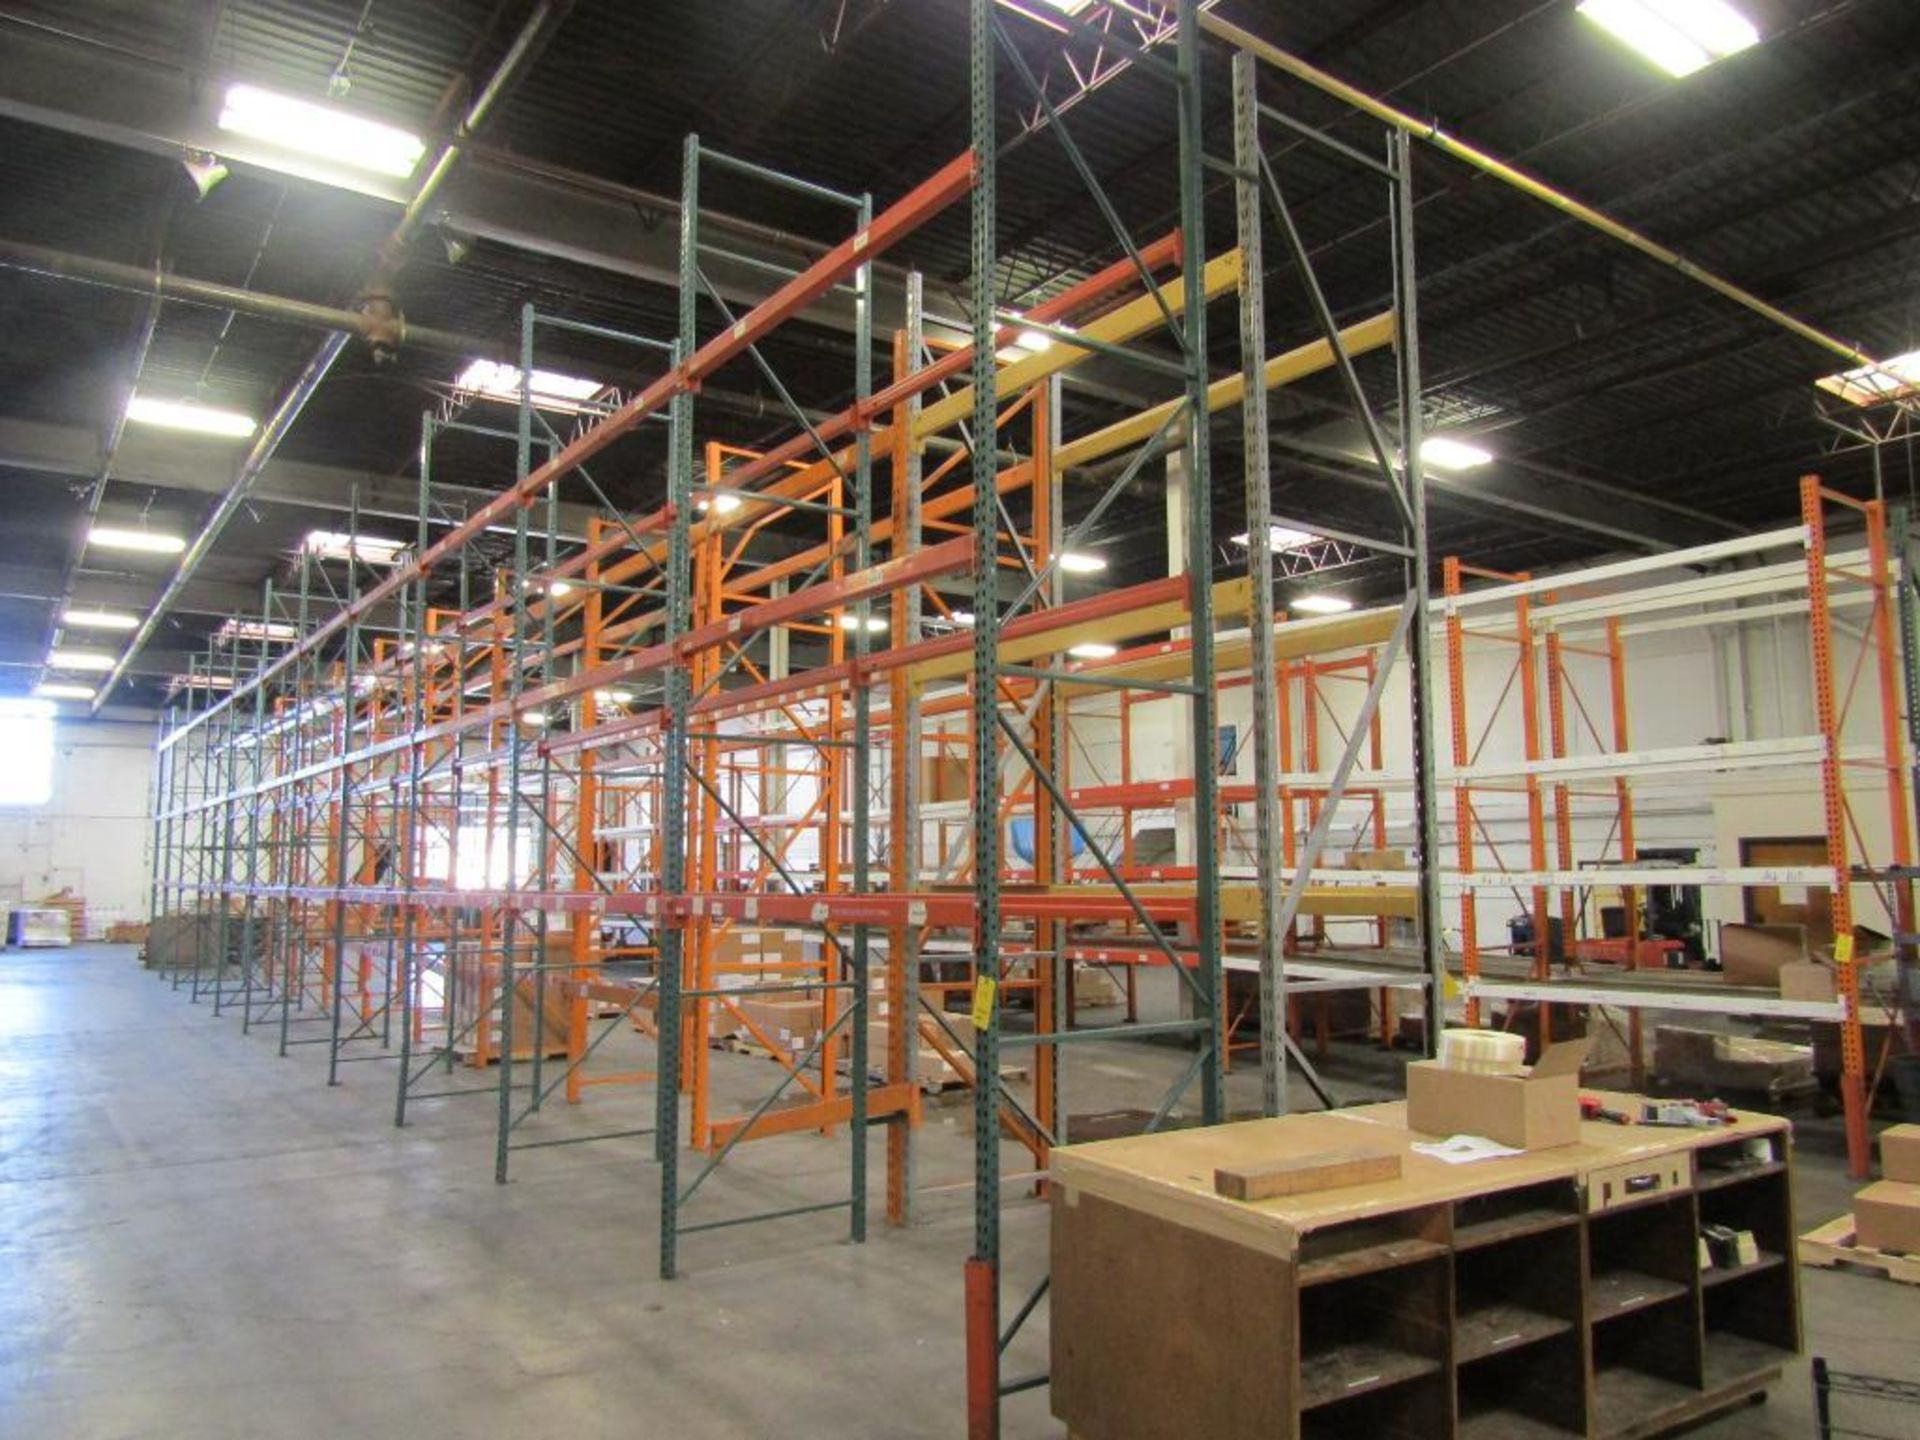 LOT: (11) Pallet Rack Sections - (9) 18ft. x 8ft. x 42in., (2) 16ft. x 8ft. x 42in.